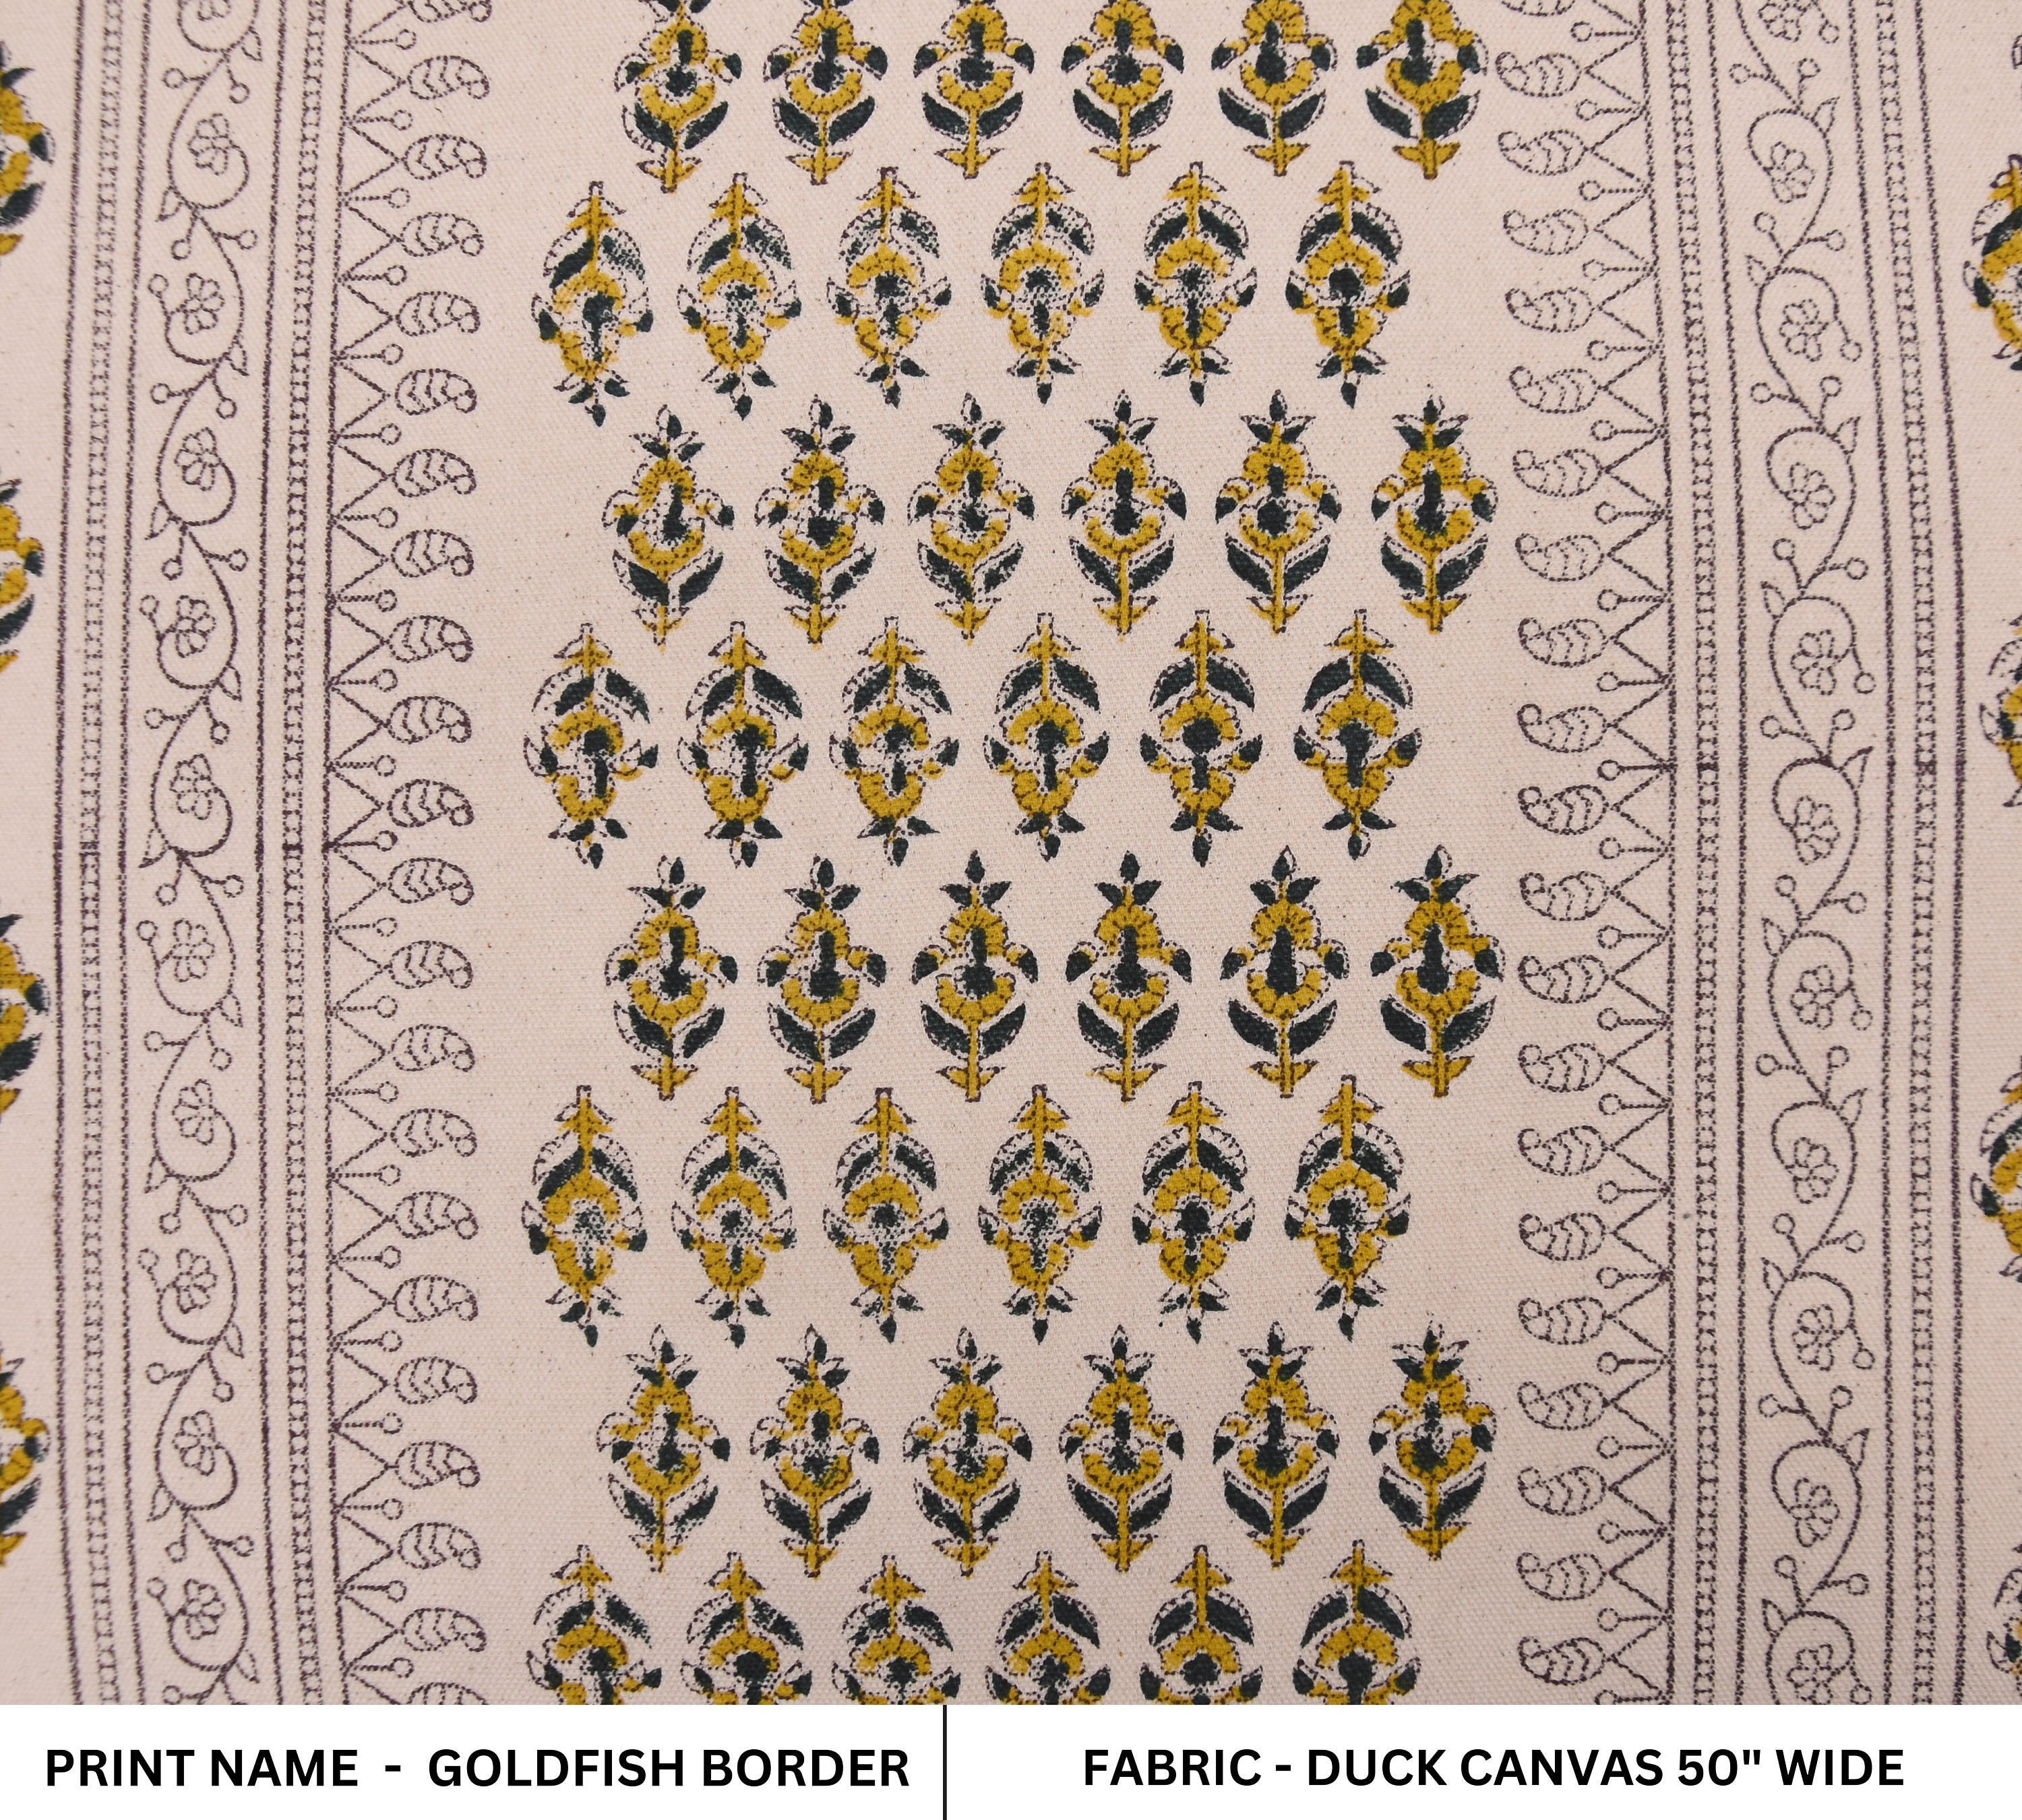 Cotton fabric duck canvas, hand block print, window shades and tablecloth, Indian textile, printed napkins - GOLDFISH BORDER